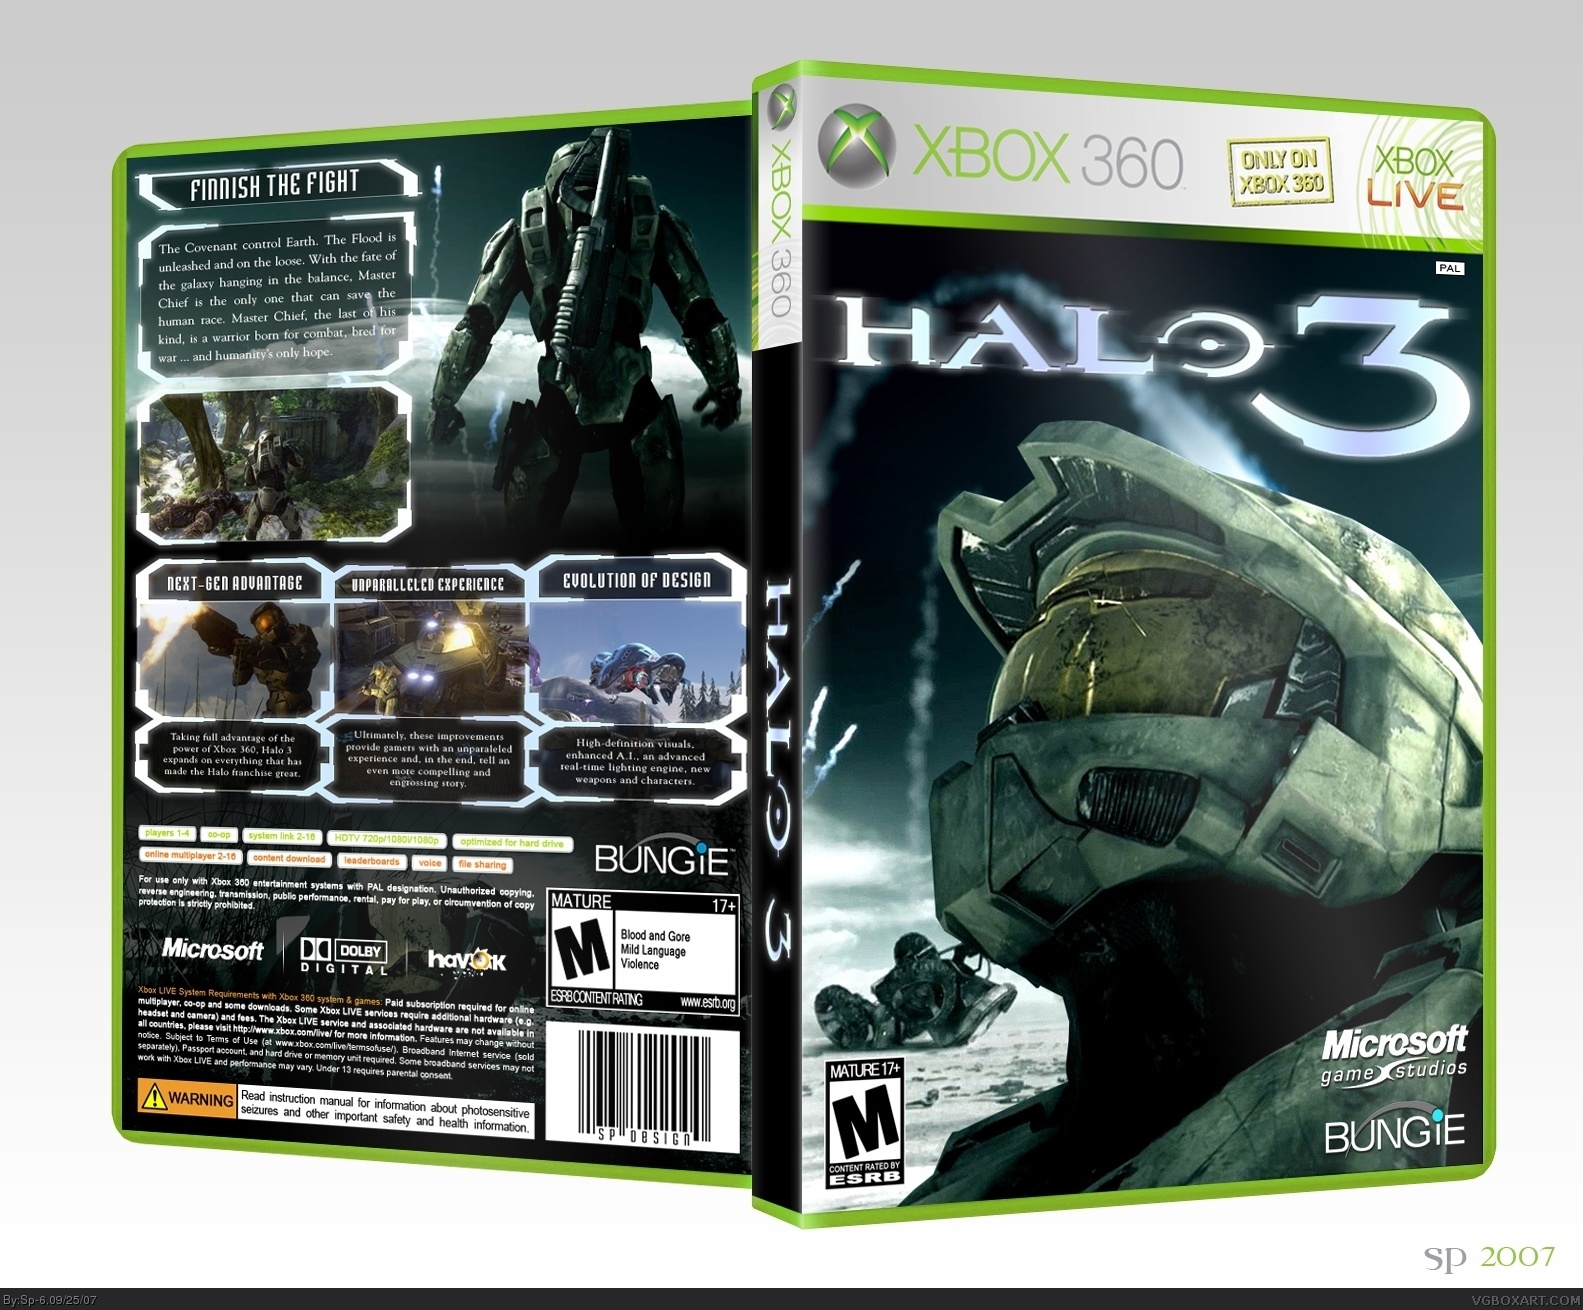 Halo 3 Xbox 360 Box Art Cover by Sp-6